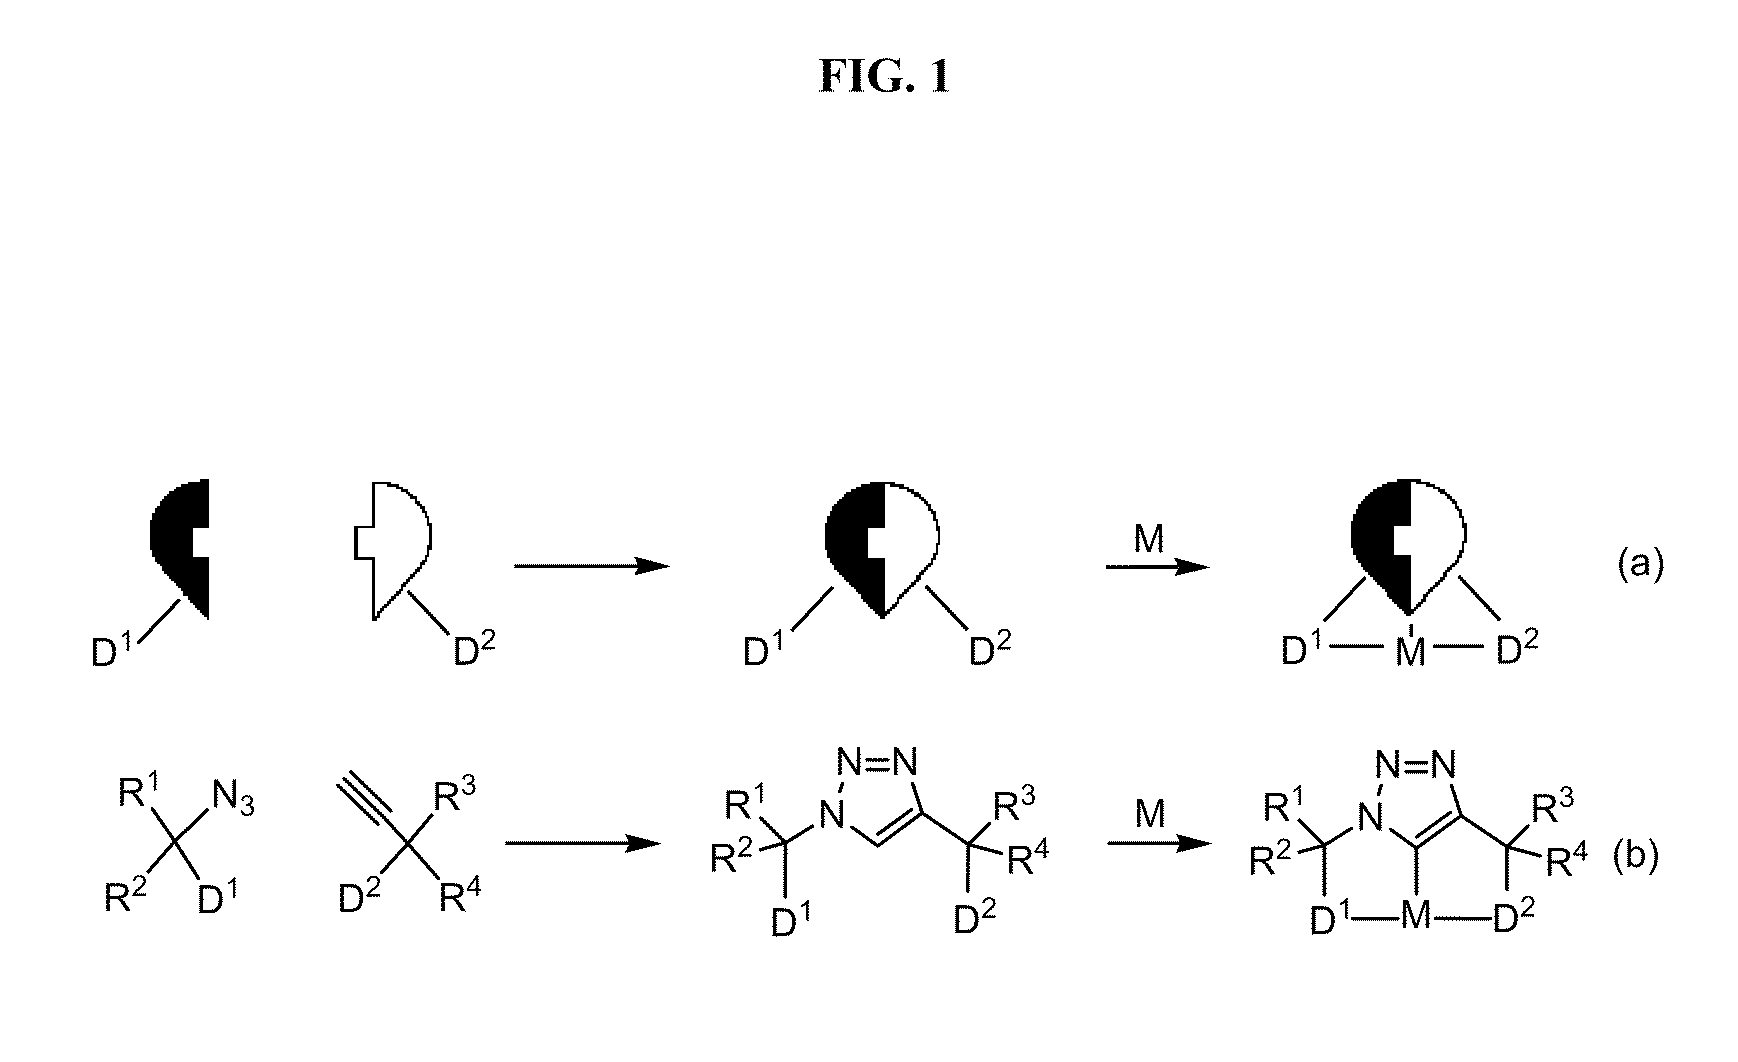 Novel diarylphosphine- and dialkylphosphine-containing compounds, processes of preparing same and uses thereof as tridentate ligands